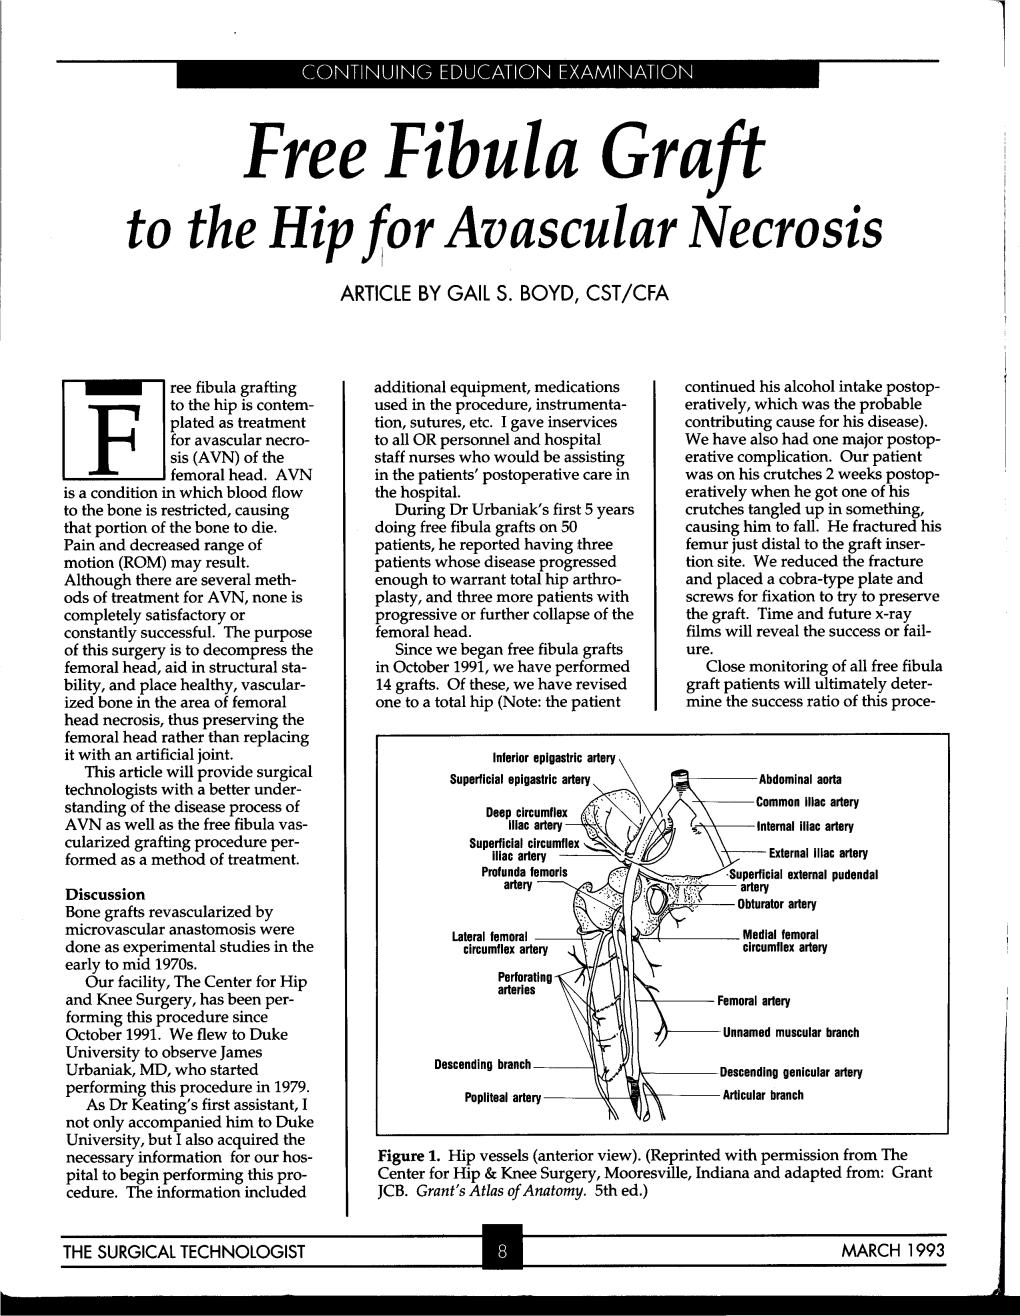 Free Fibula Graft to the Hip Fori Avascular Necrosis ARTICLE by GAIL S